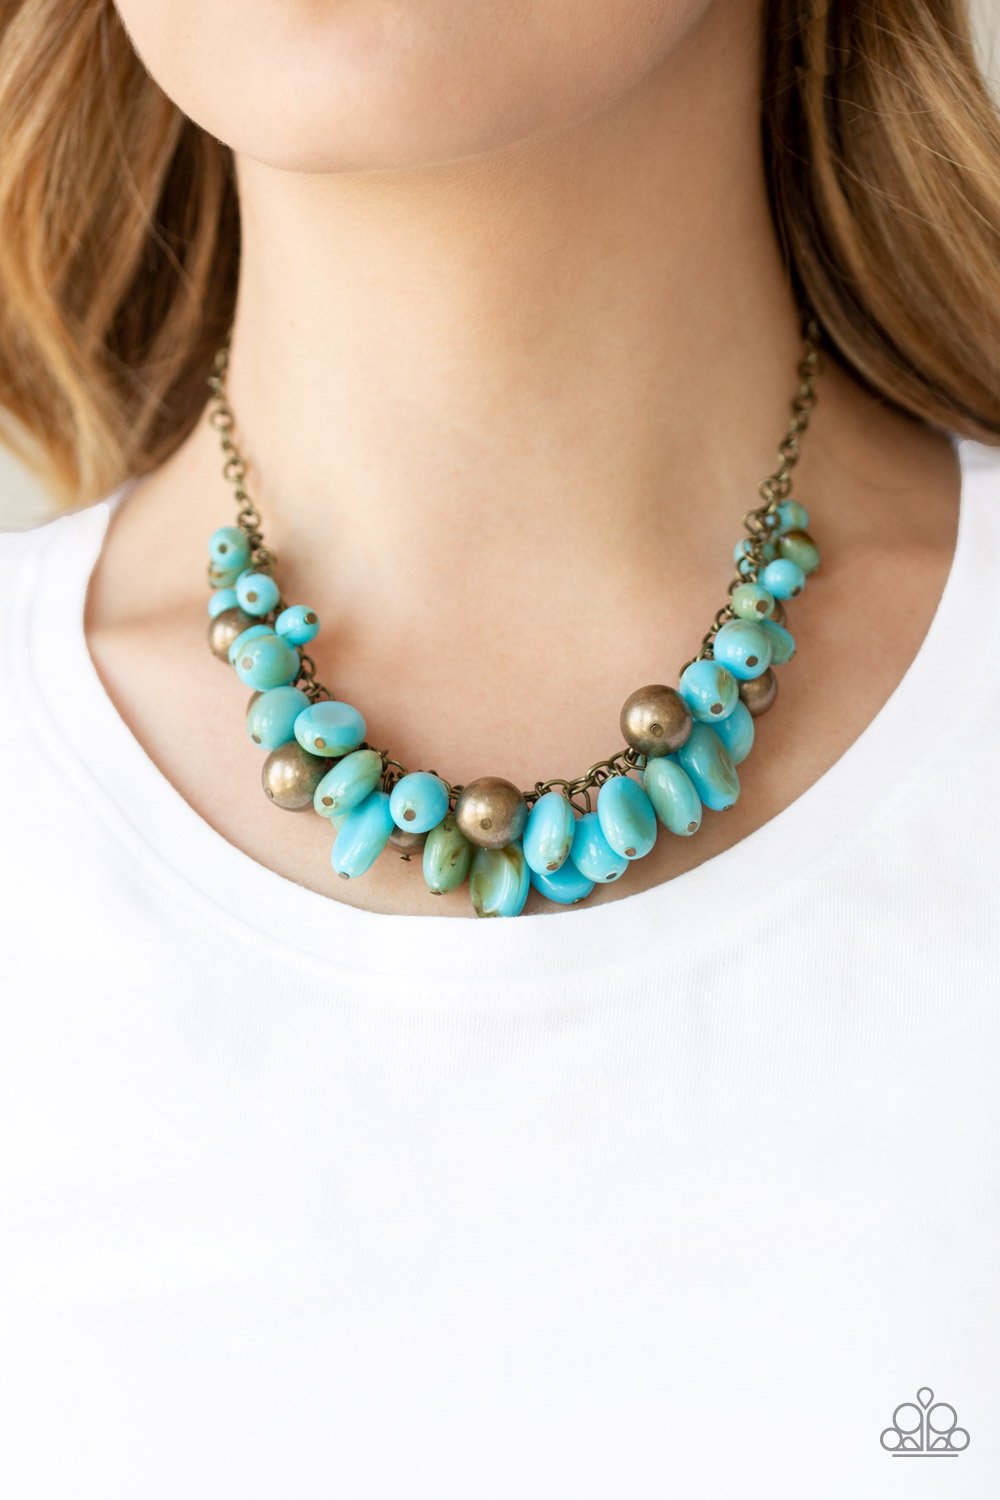 Paparazzi Accessories  - Full Out Fringe - Turquoise  (Blue) Necklace